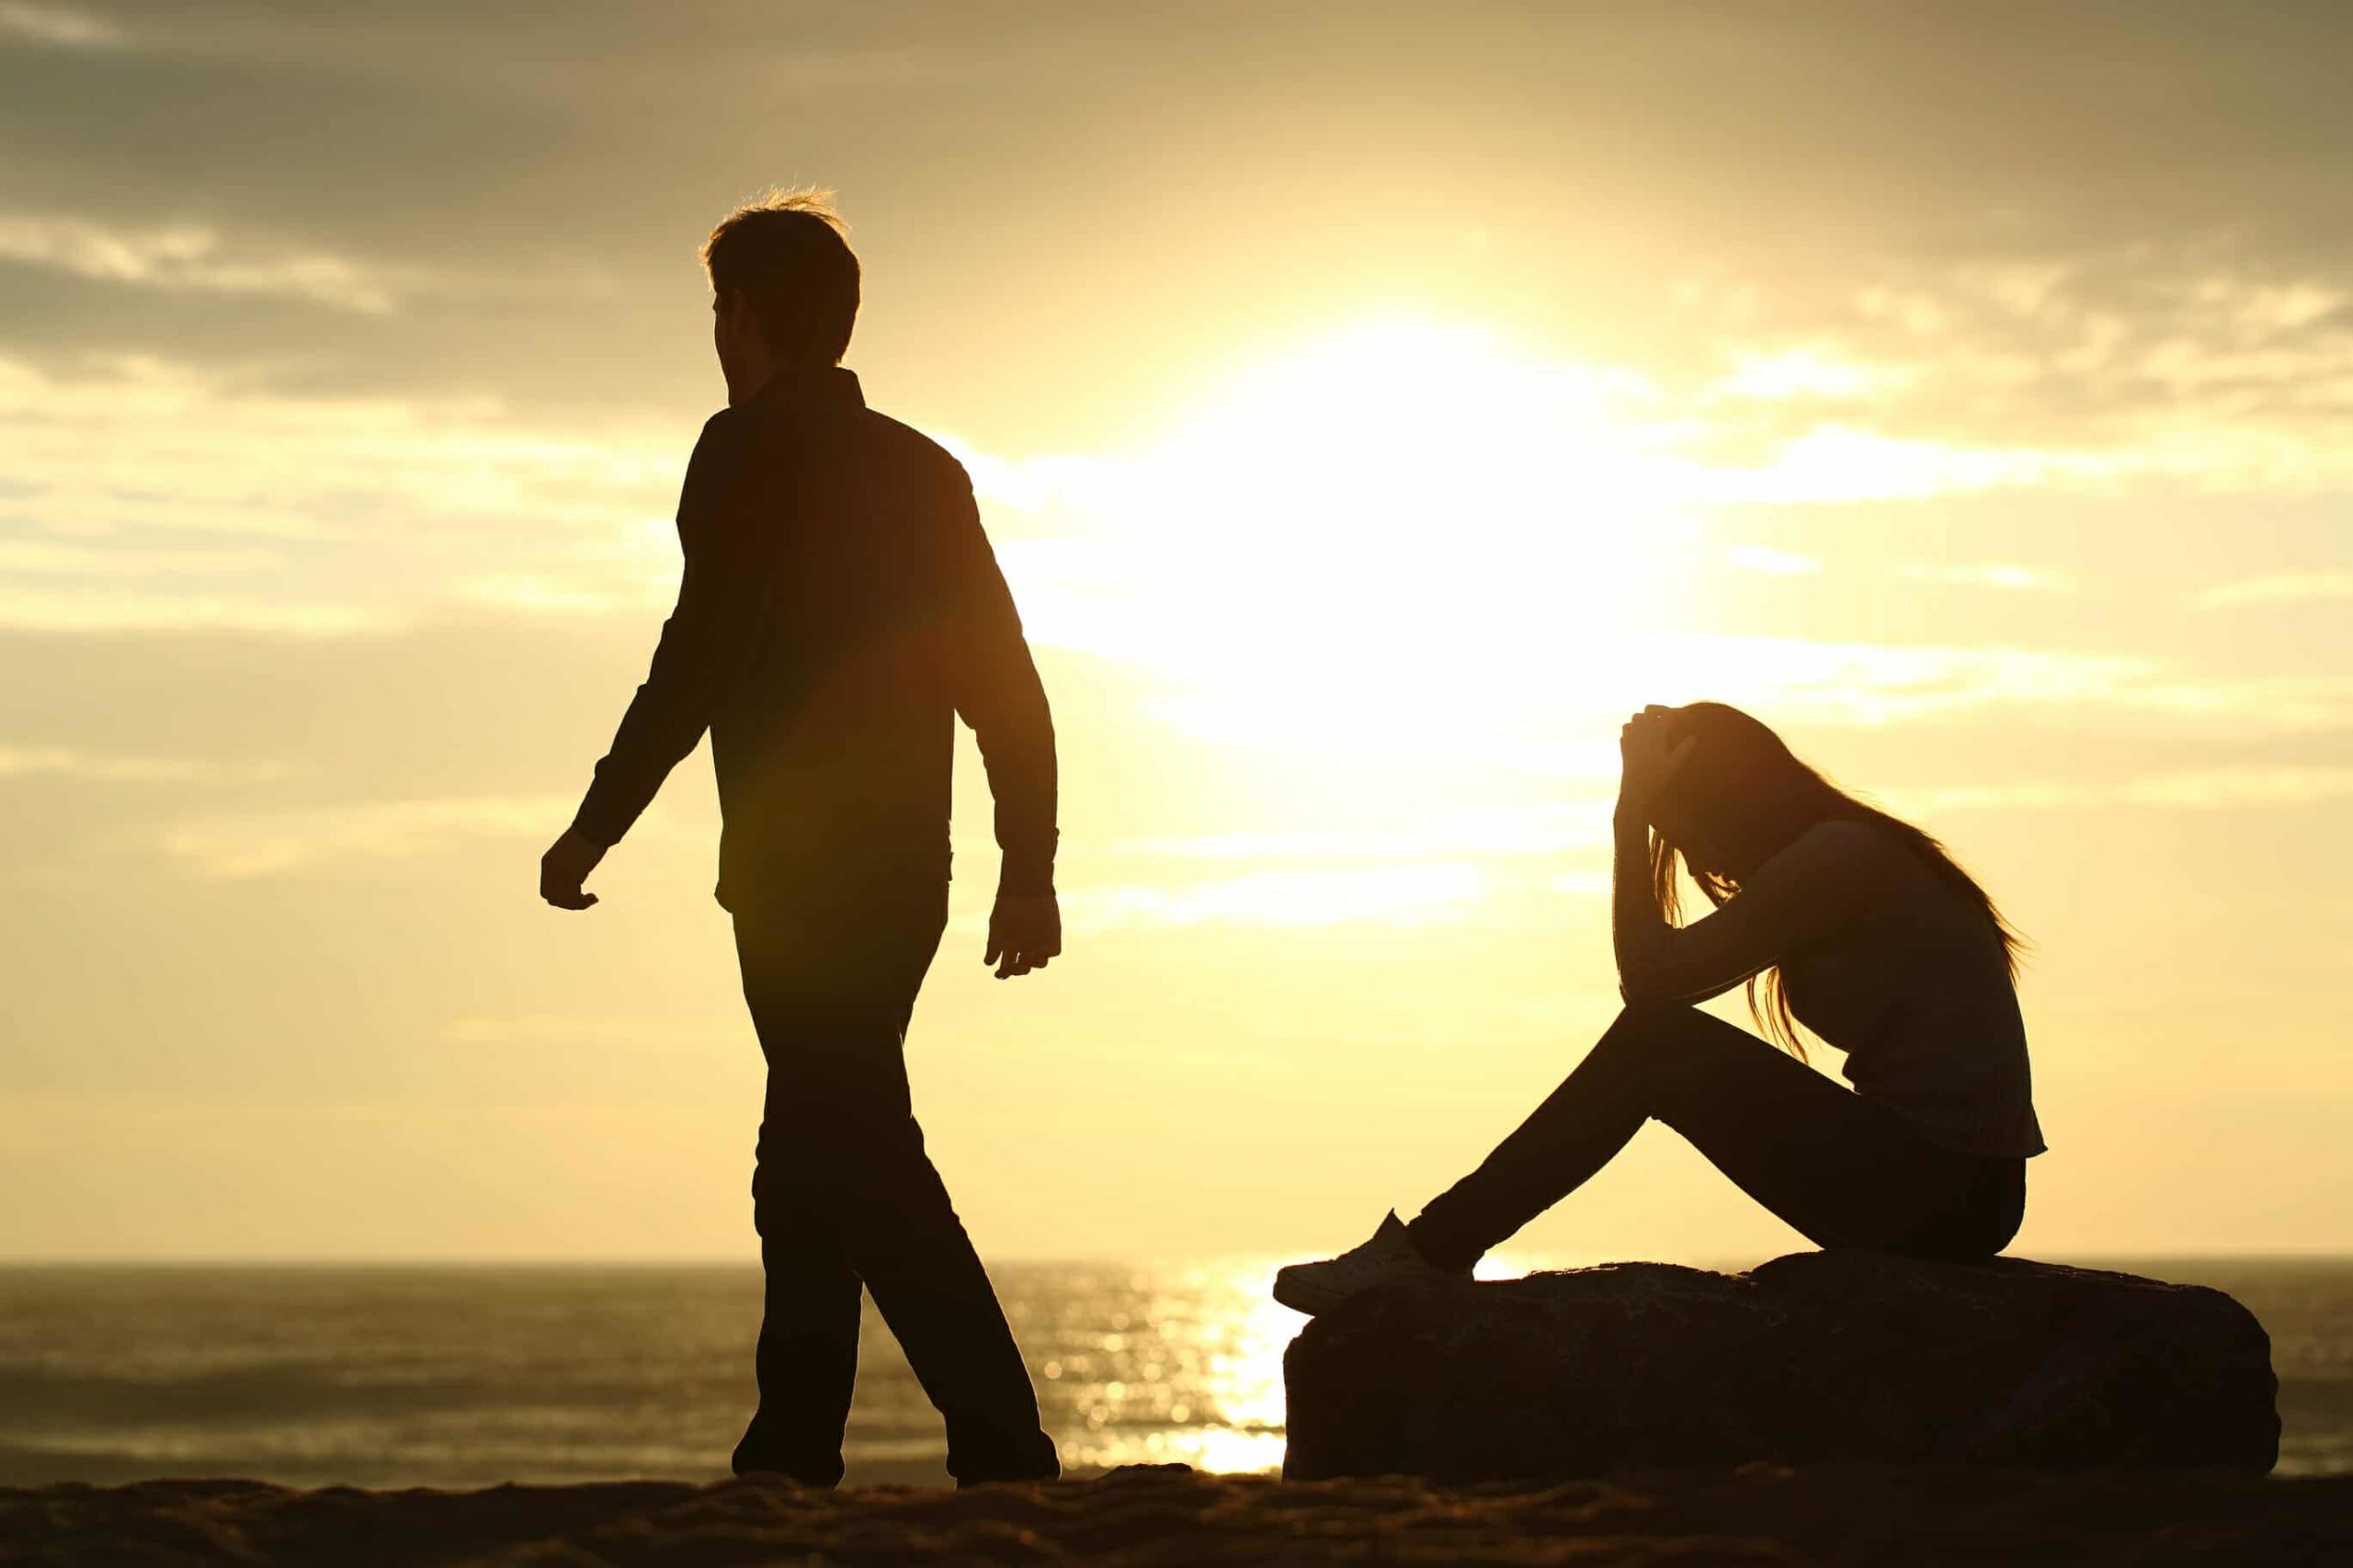 Man walking away from distraught woman on the beach in the sunset.